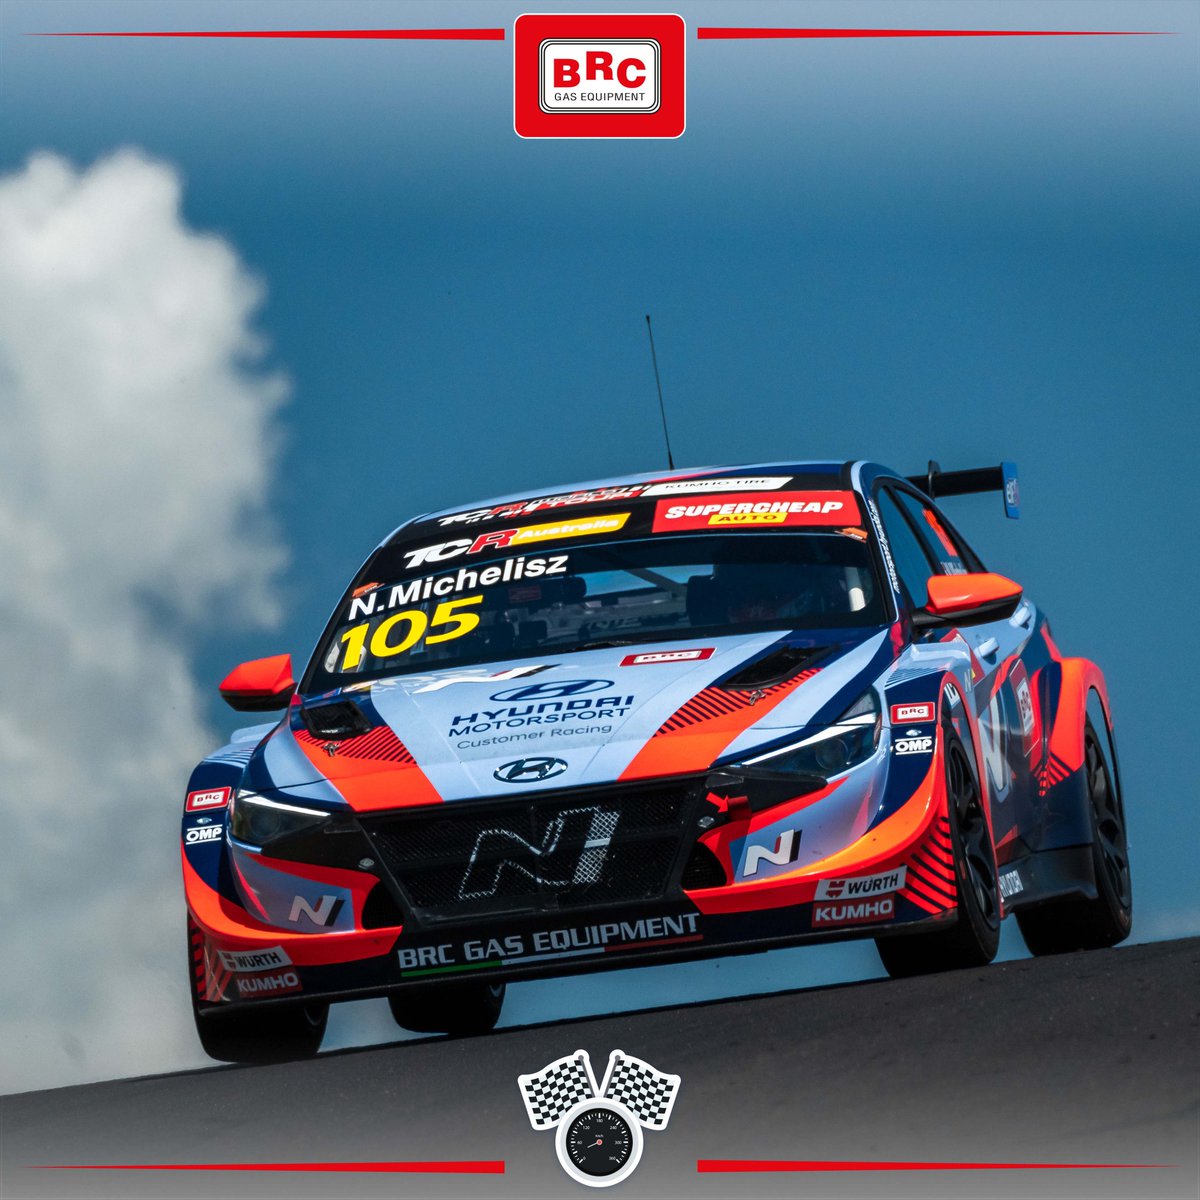 BRC Hyundai N Squadra Corse all set for majestic Macau Kumho TCR World Tour finale with three-car entry. As the inaugural Kumho TCR World Tour season draws to a close, BRC continues its triple-header journey to Macau t (November 16-19), for the ninth round on the calendar.